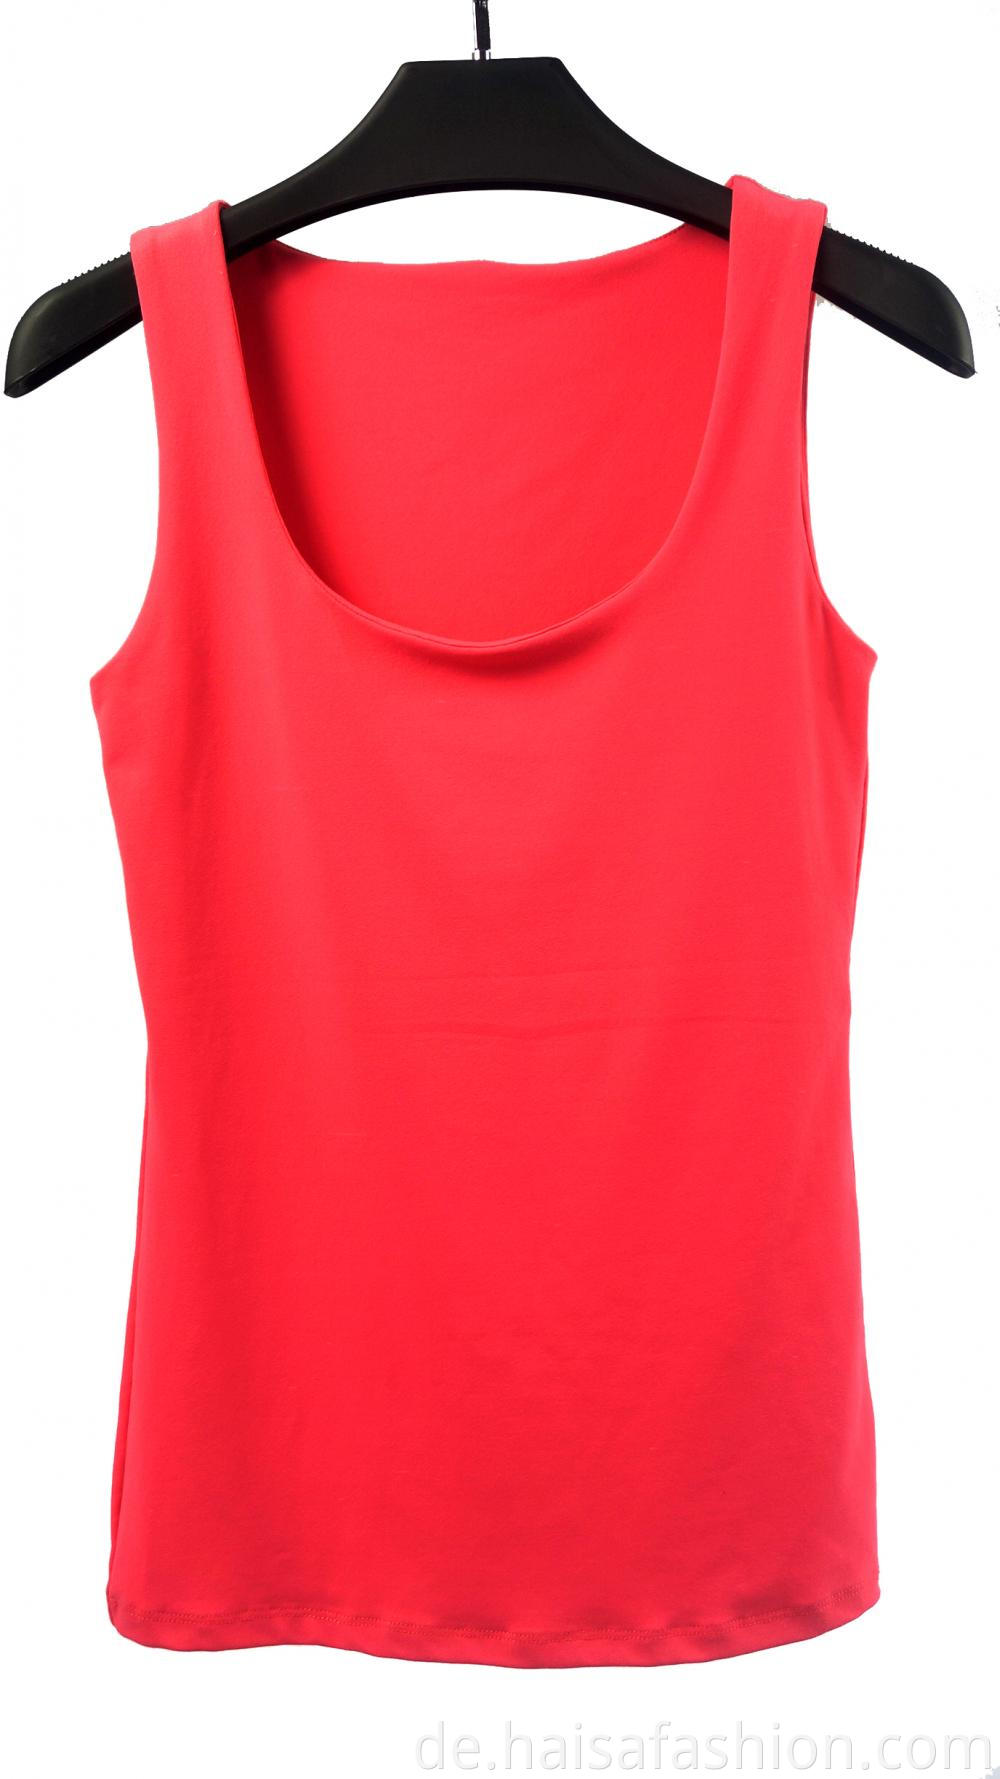 Ladies' Round Neck Tank Top In Solid Color